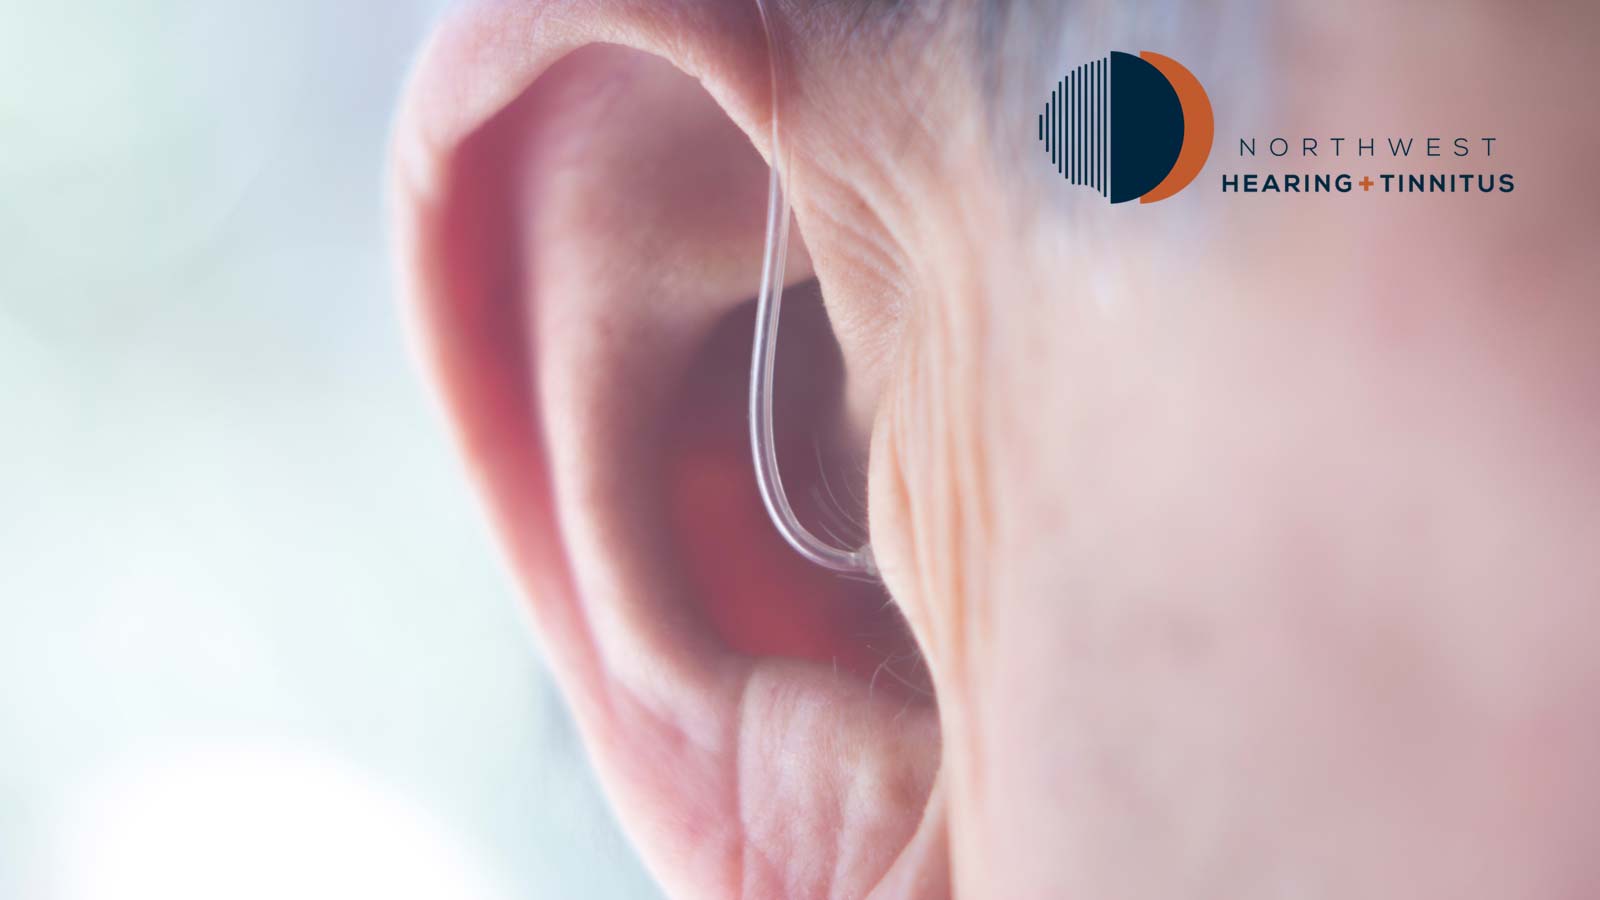 Can Hearing Aids Assist with Tinnitus Management? - Northwest Hearing + Tinnitus - Seattle, WA and Olympia, WA